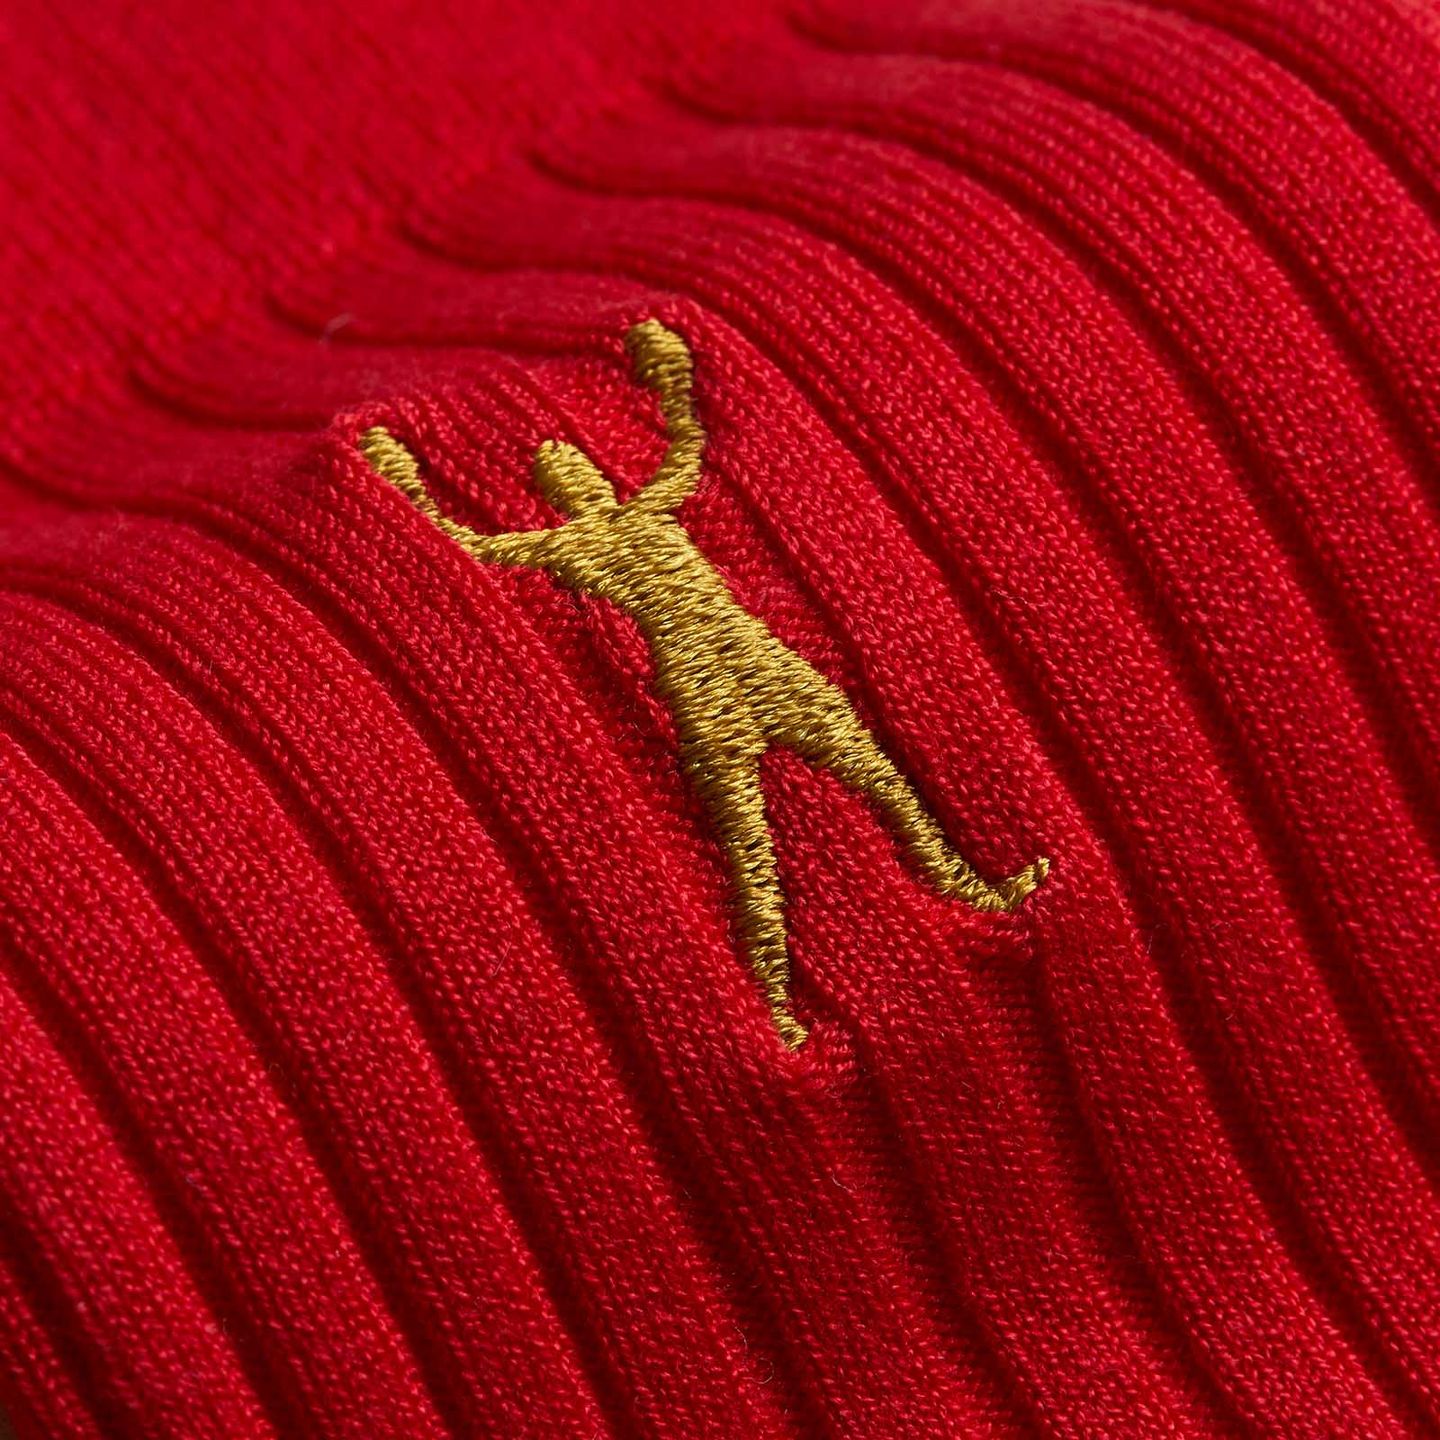 Close up of Muhammad Ali red socks and gold logo